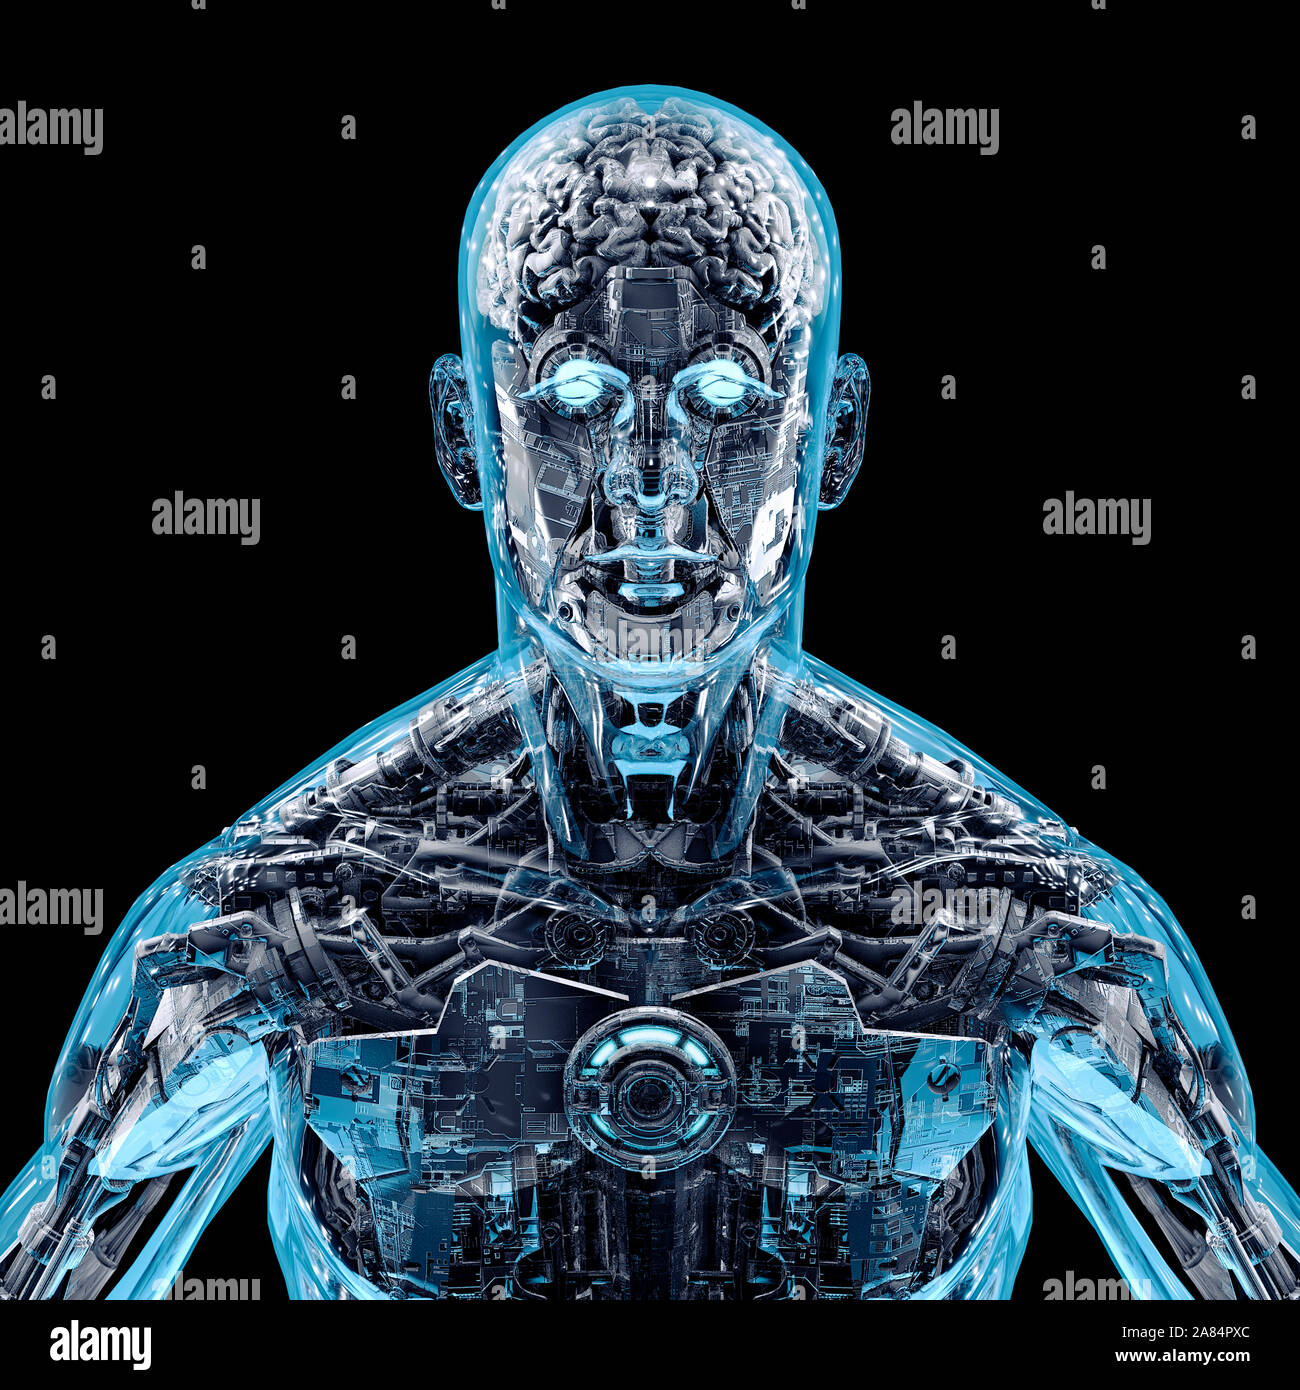 Digital mind reloaded / 3D illustration of futuristic glass science fiction male humanoid cyborg composed of complex machinery Stock Photo